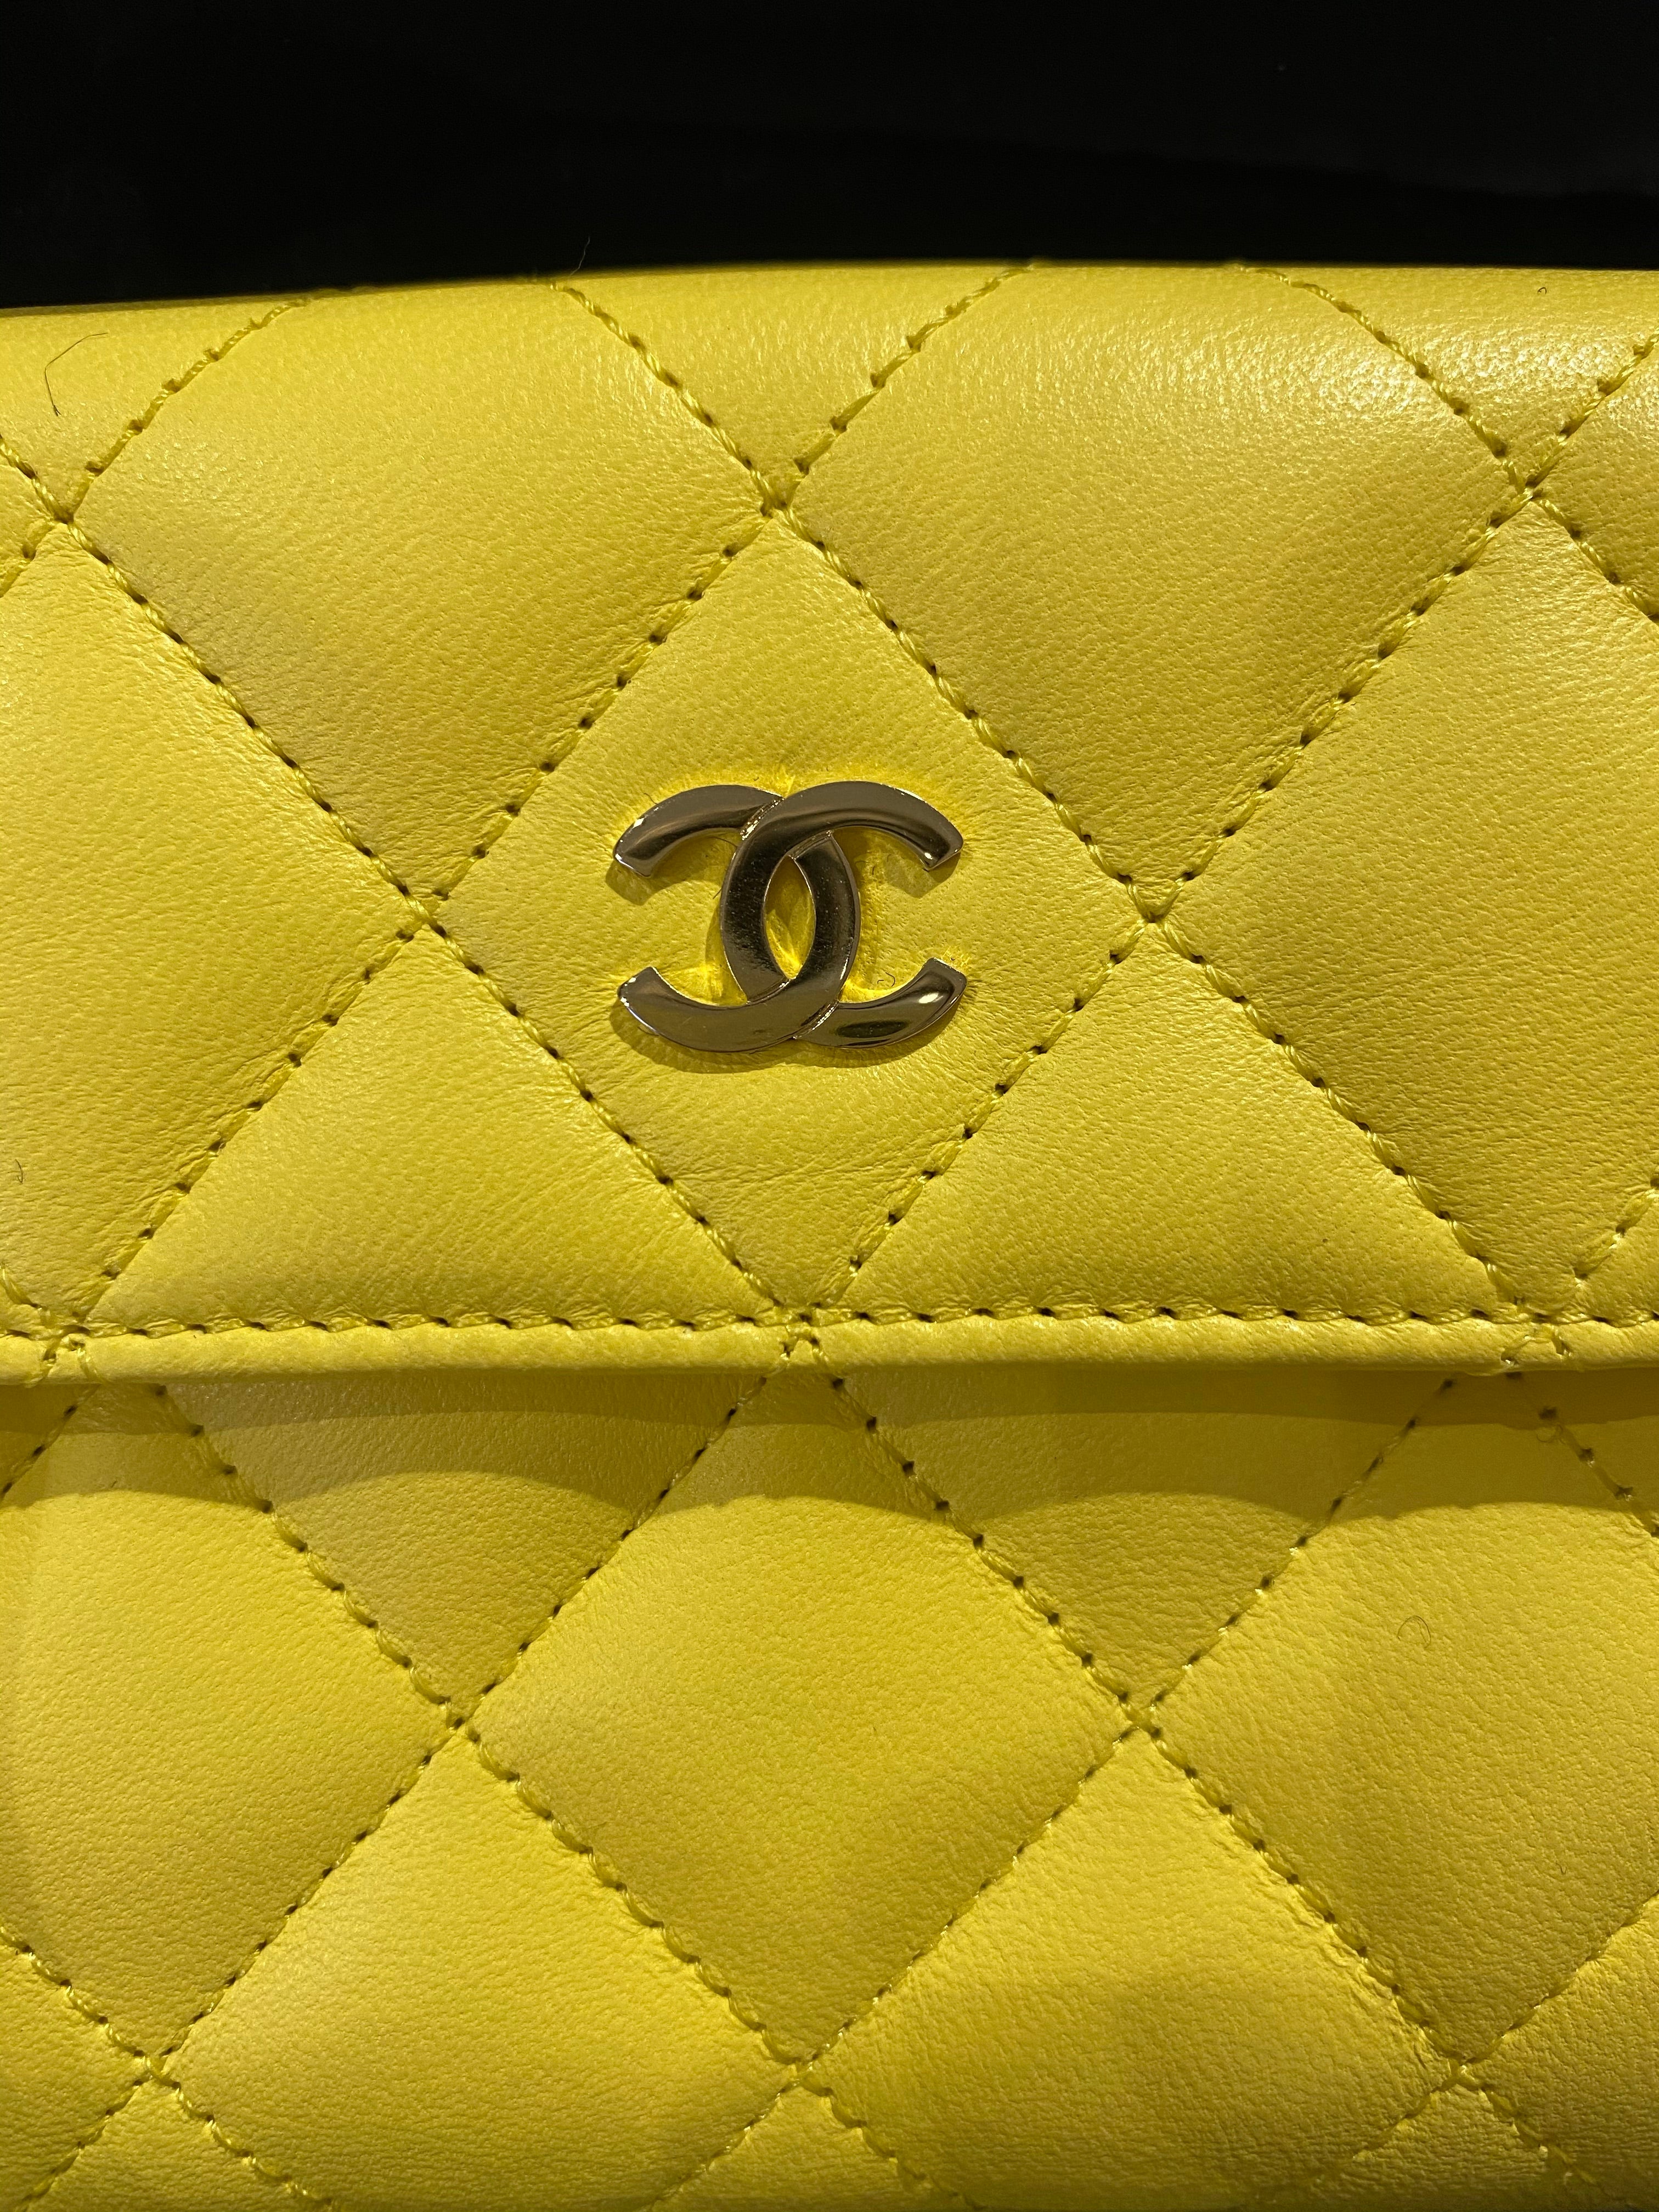 New Chanel yellow wallet